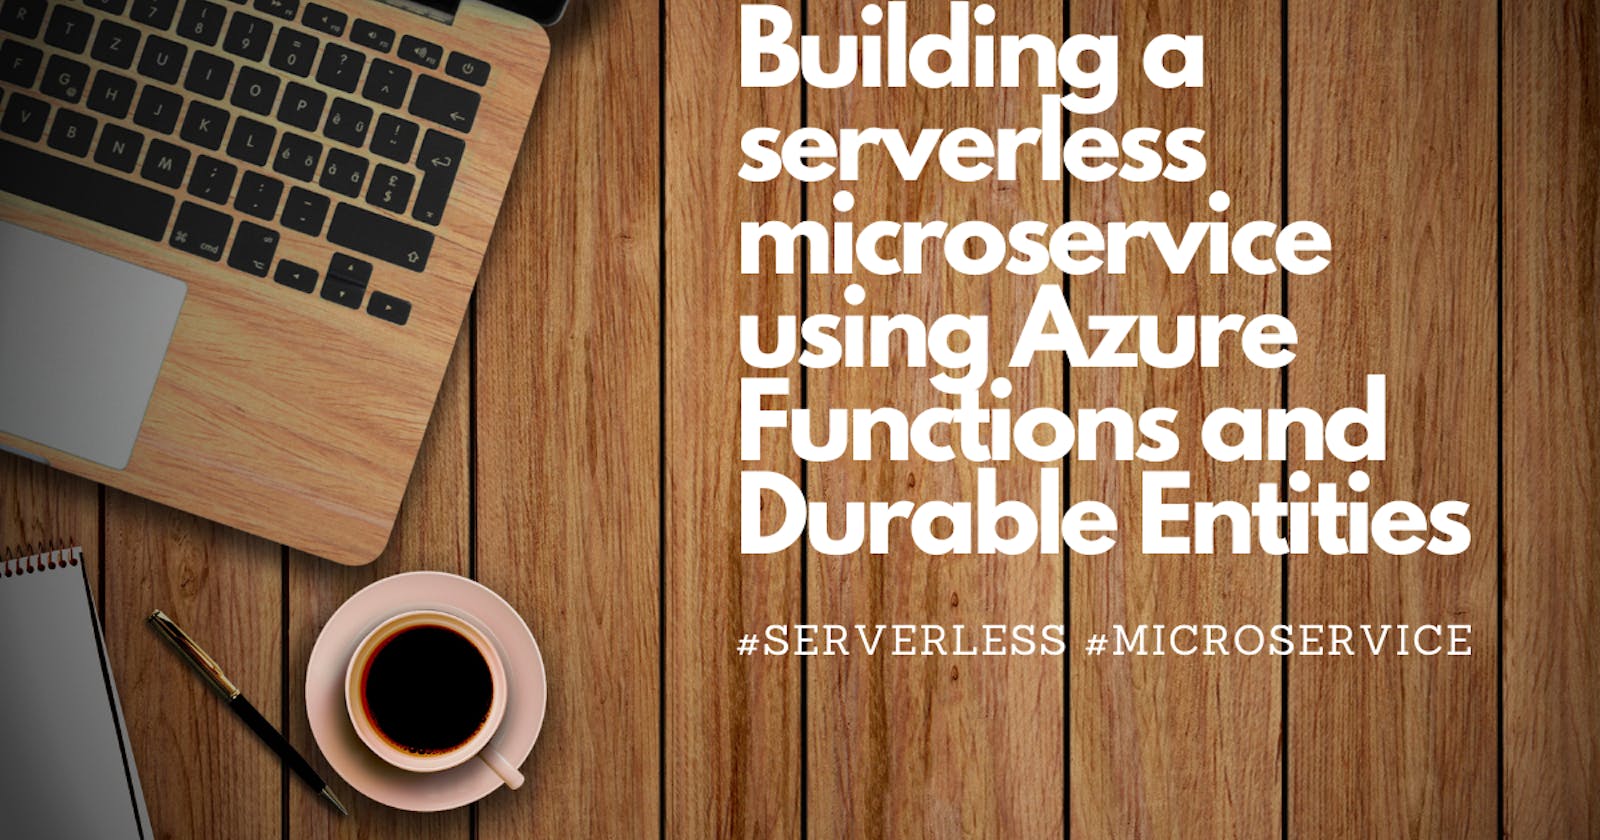 Building a serverless “Shopping Cart” microservice using Azure functions and Durable entities with…